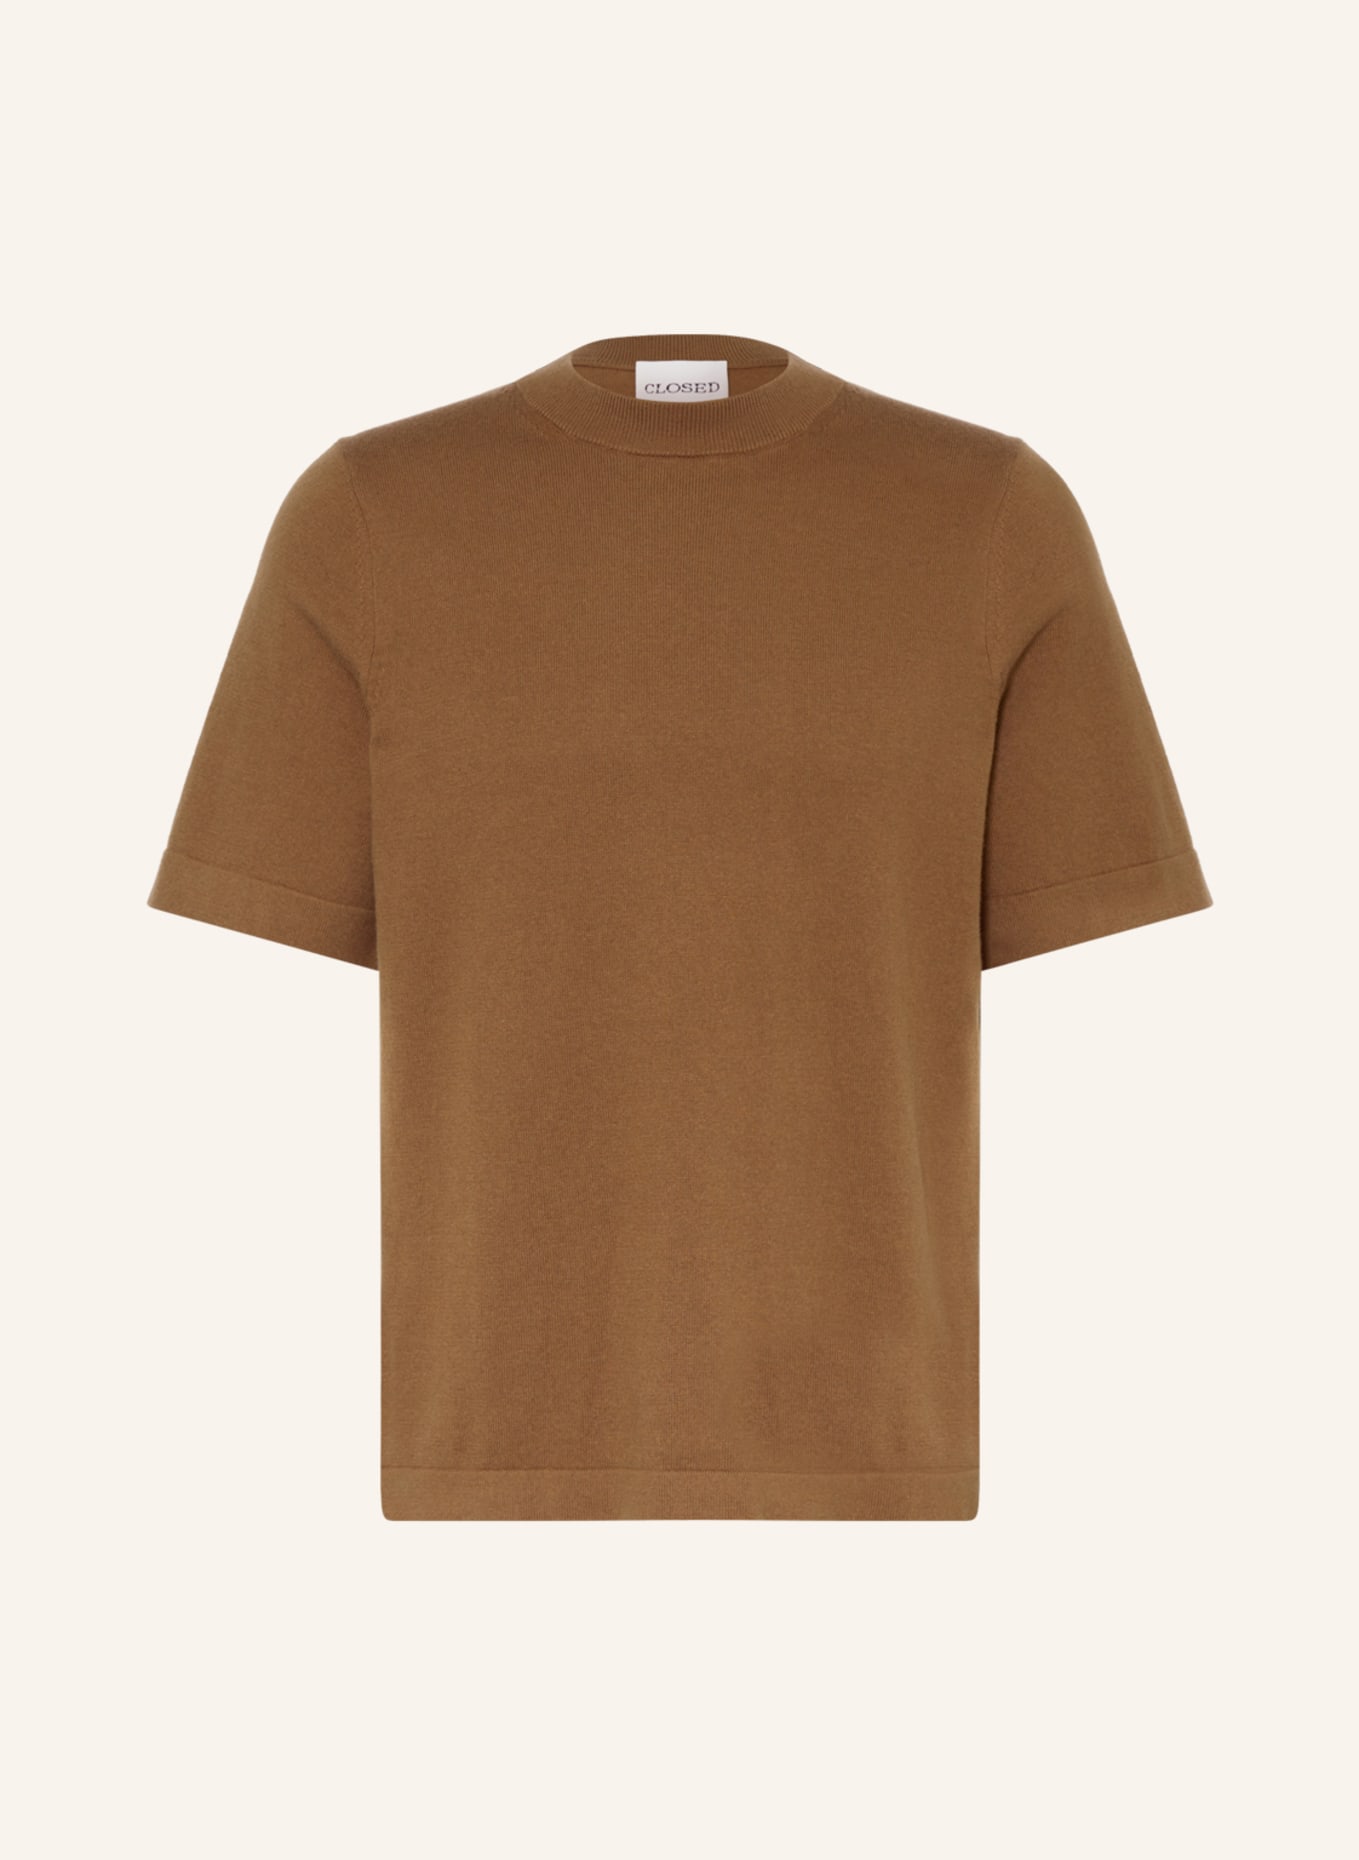 CLOSED Knit shirt, Color: BROWN (Image 1)